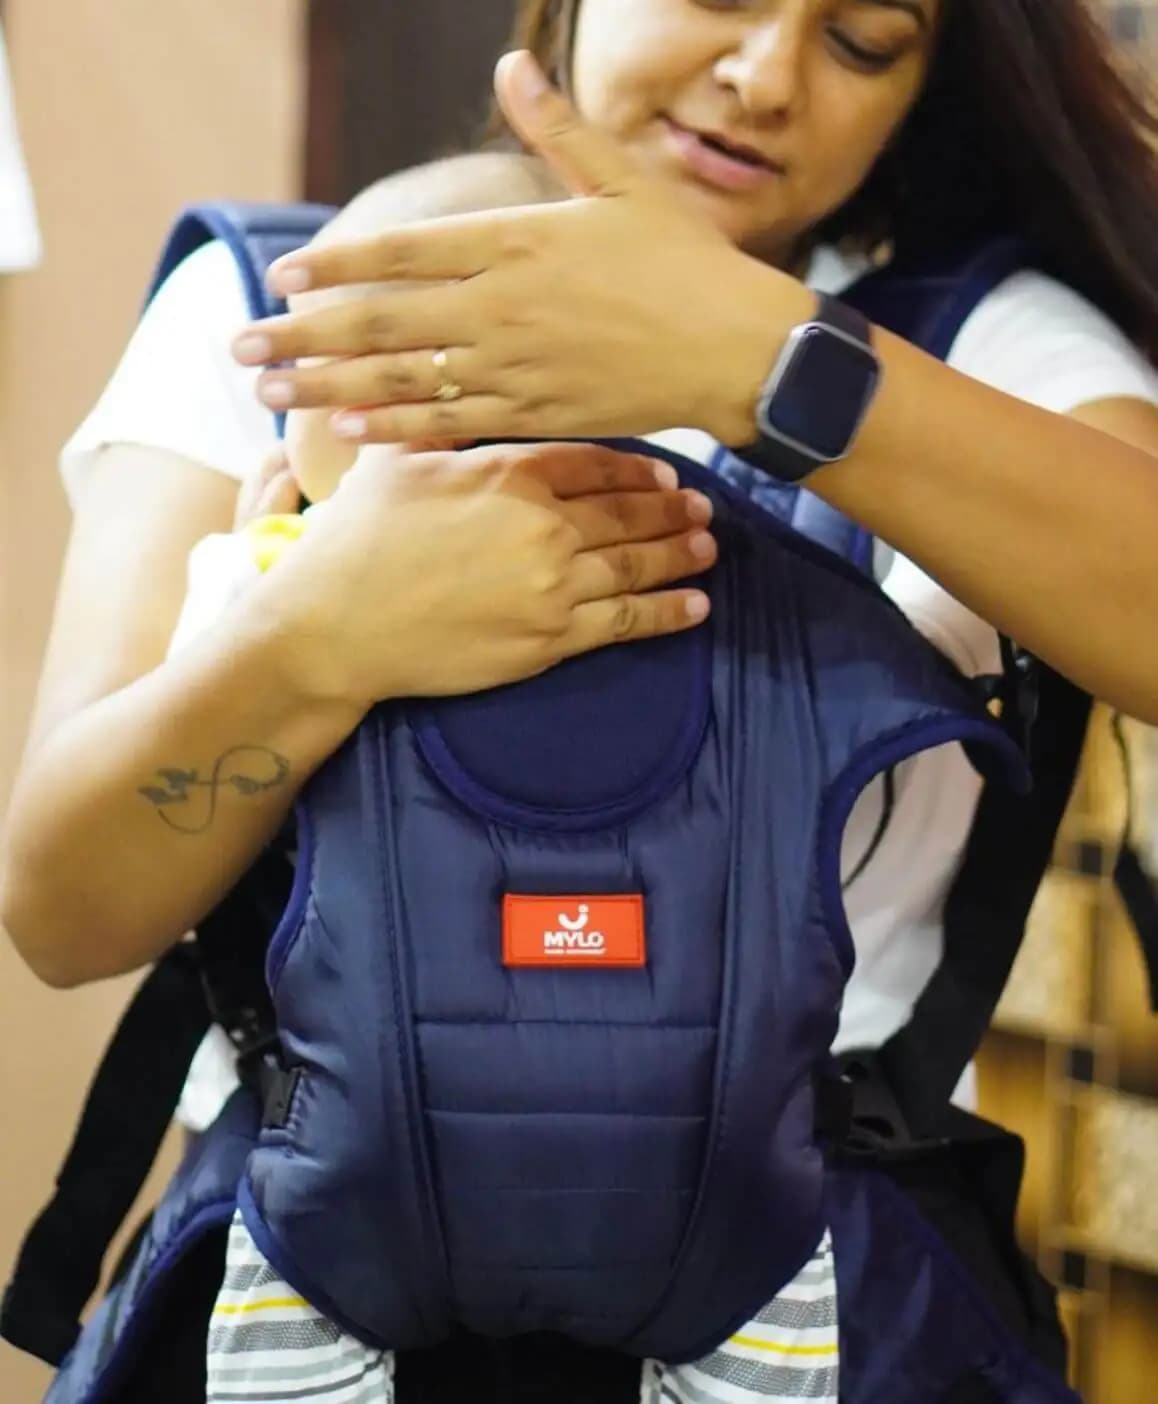 Premium 3 in 1 Comfortable & Adjustable Baby Carrier (6 - 15 Months)  Royal Blue